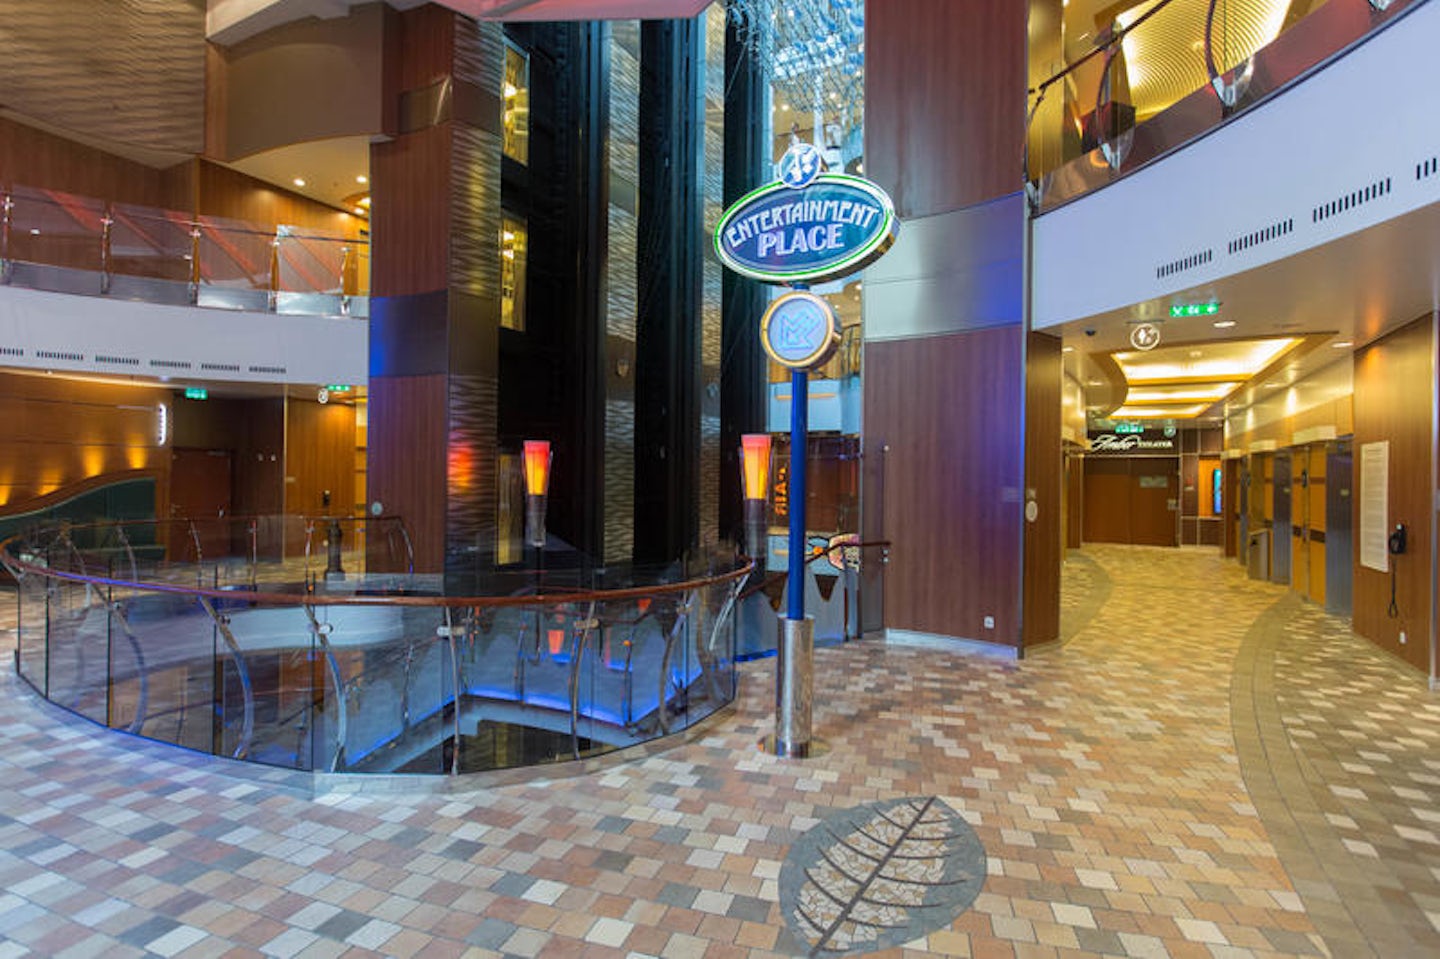 Entertainment Place on Allure of the Seas